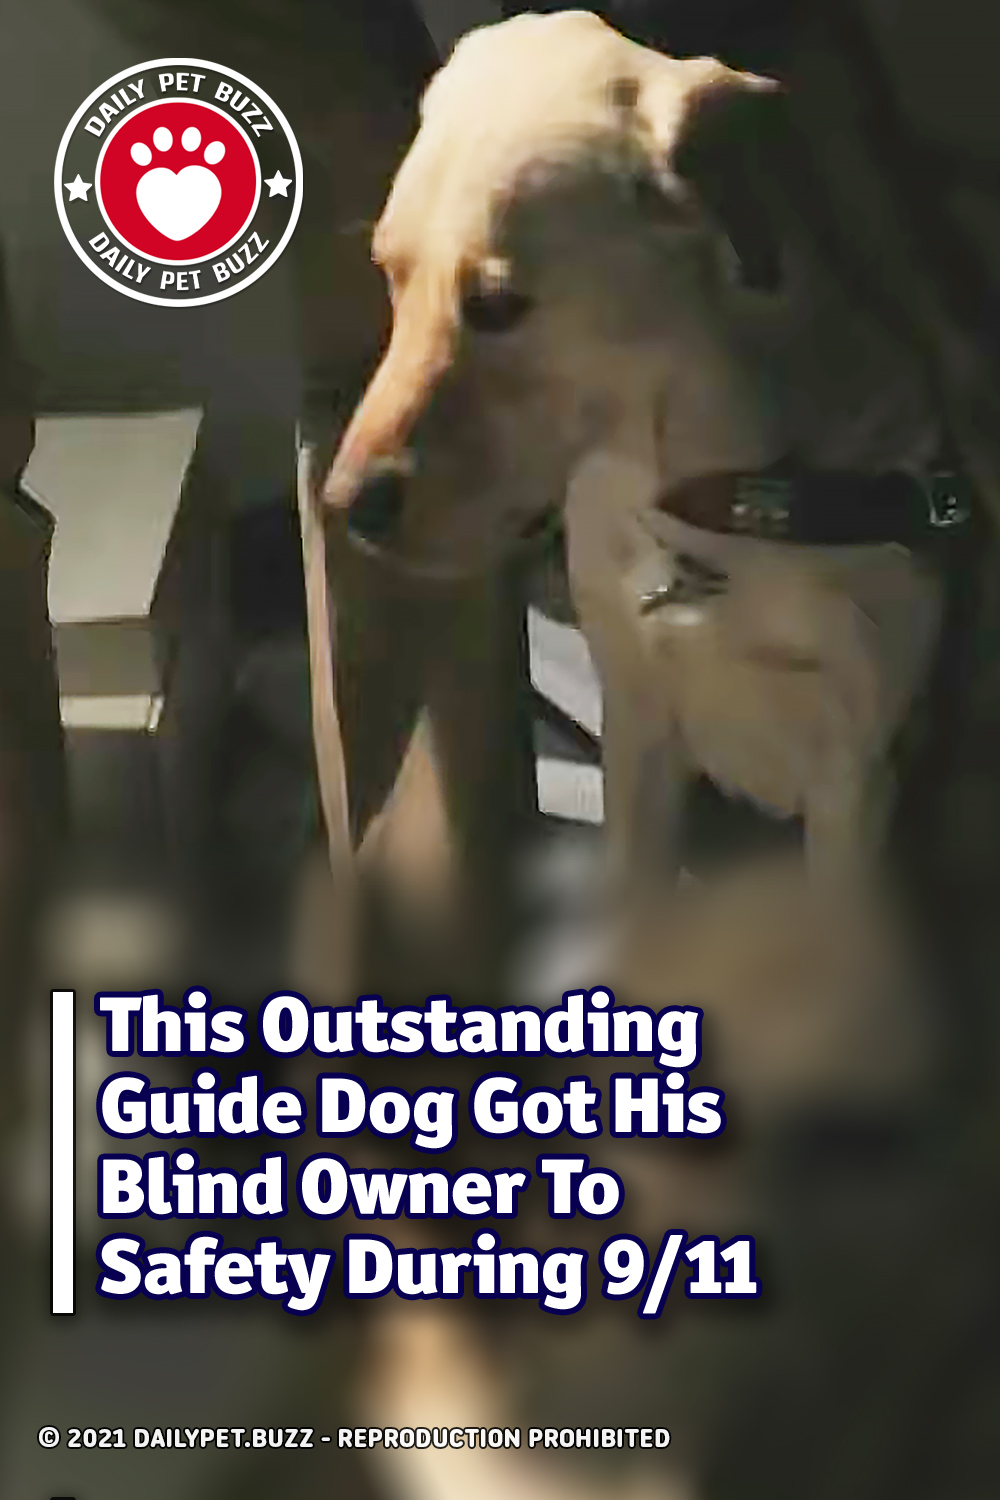 This Outstanding Guide Dog Got His Blind Owner To Safety During 9/11